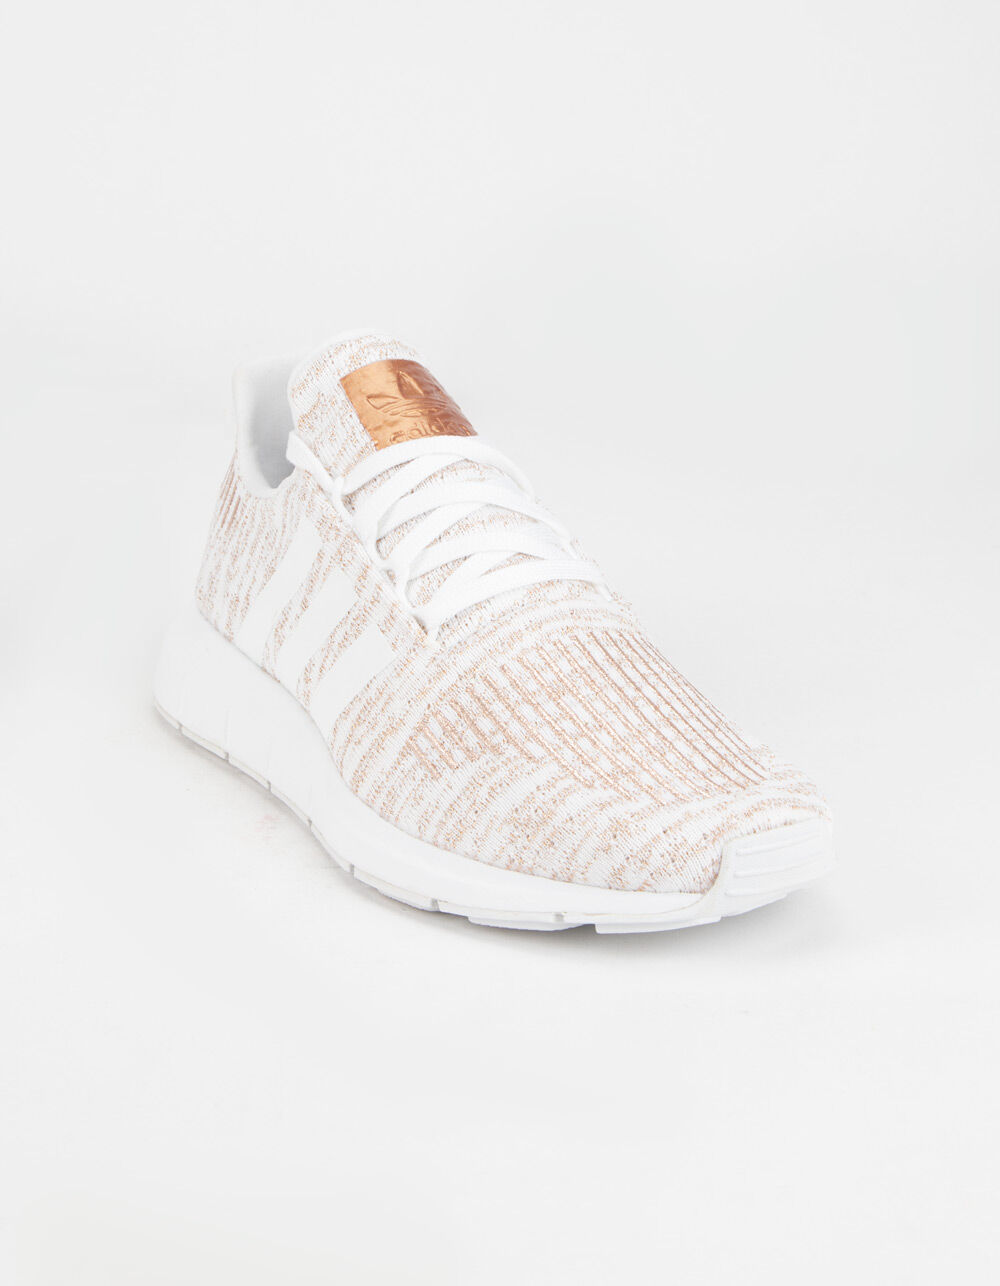 chef fællesskab gidsel ADIDAS Swift Run White & Rose Gold Womens Shoes - WHITE COMBO | Tillys